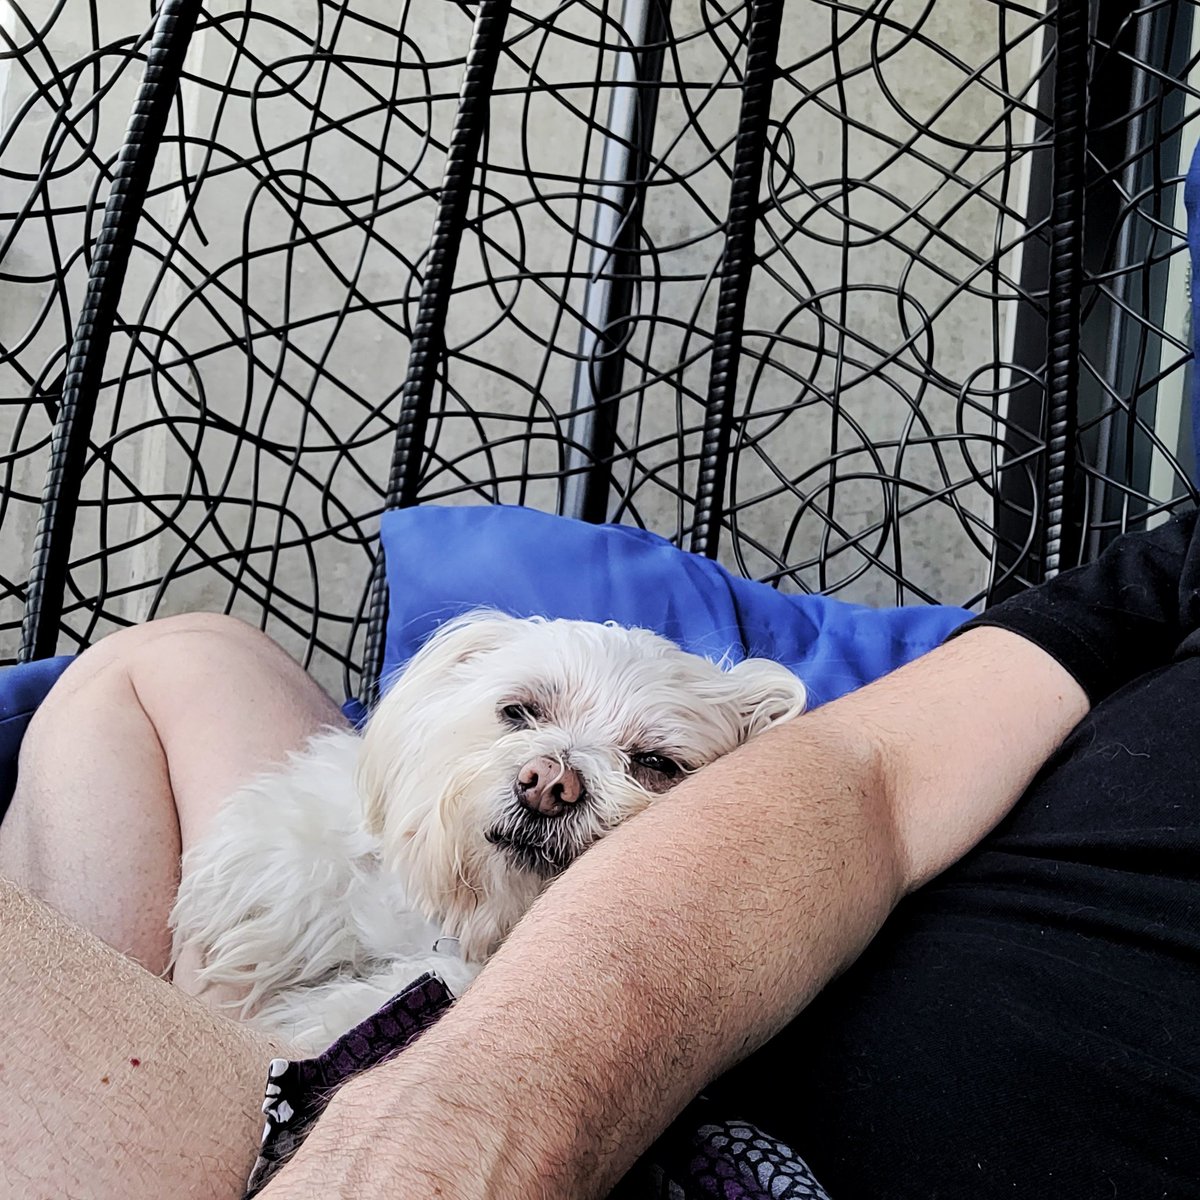 Had a little snuggle with my cuddly girl this afternoon #MeAndMyTao #Maltese #CuteDogs #DogsofMelbourne #DogsofTwittter